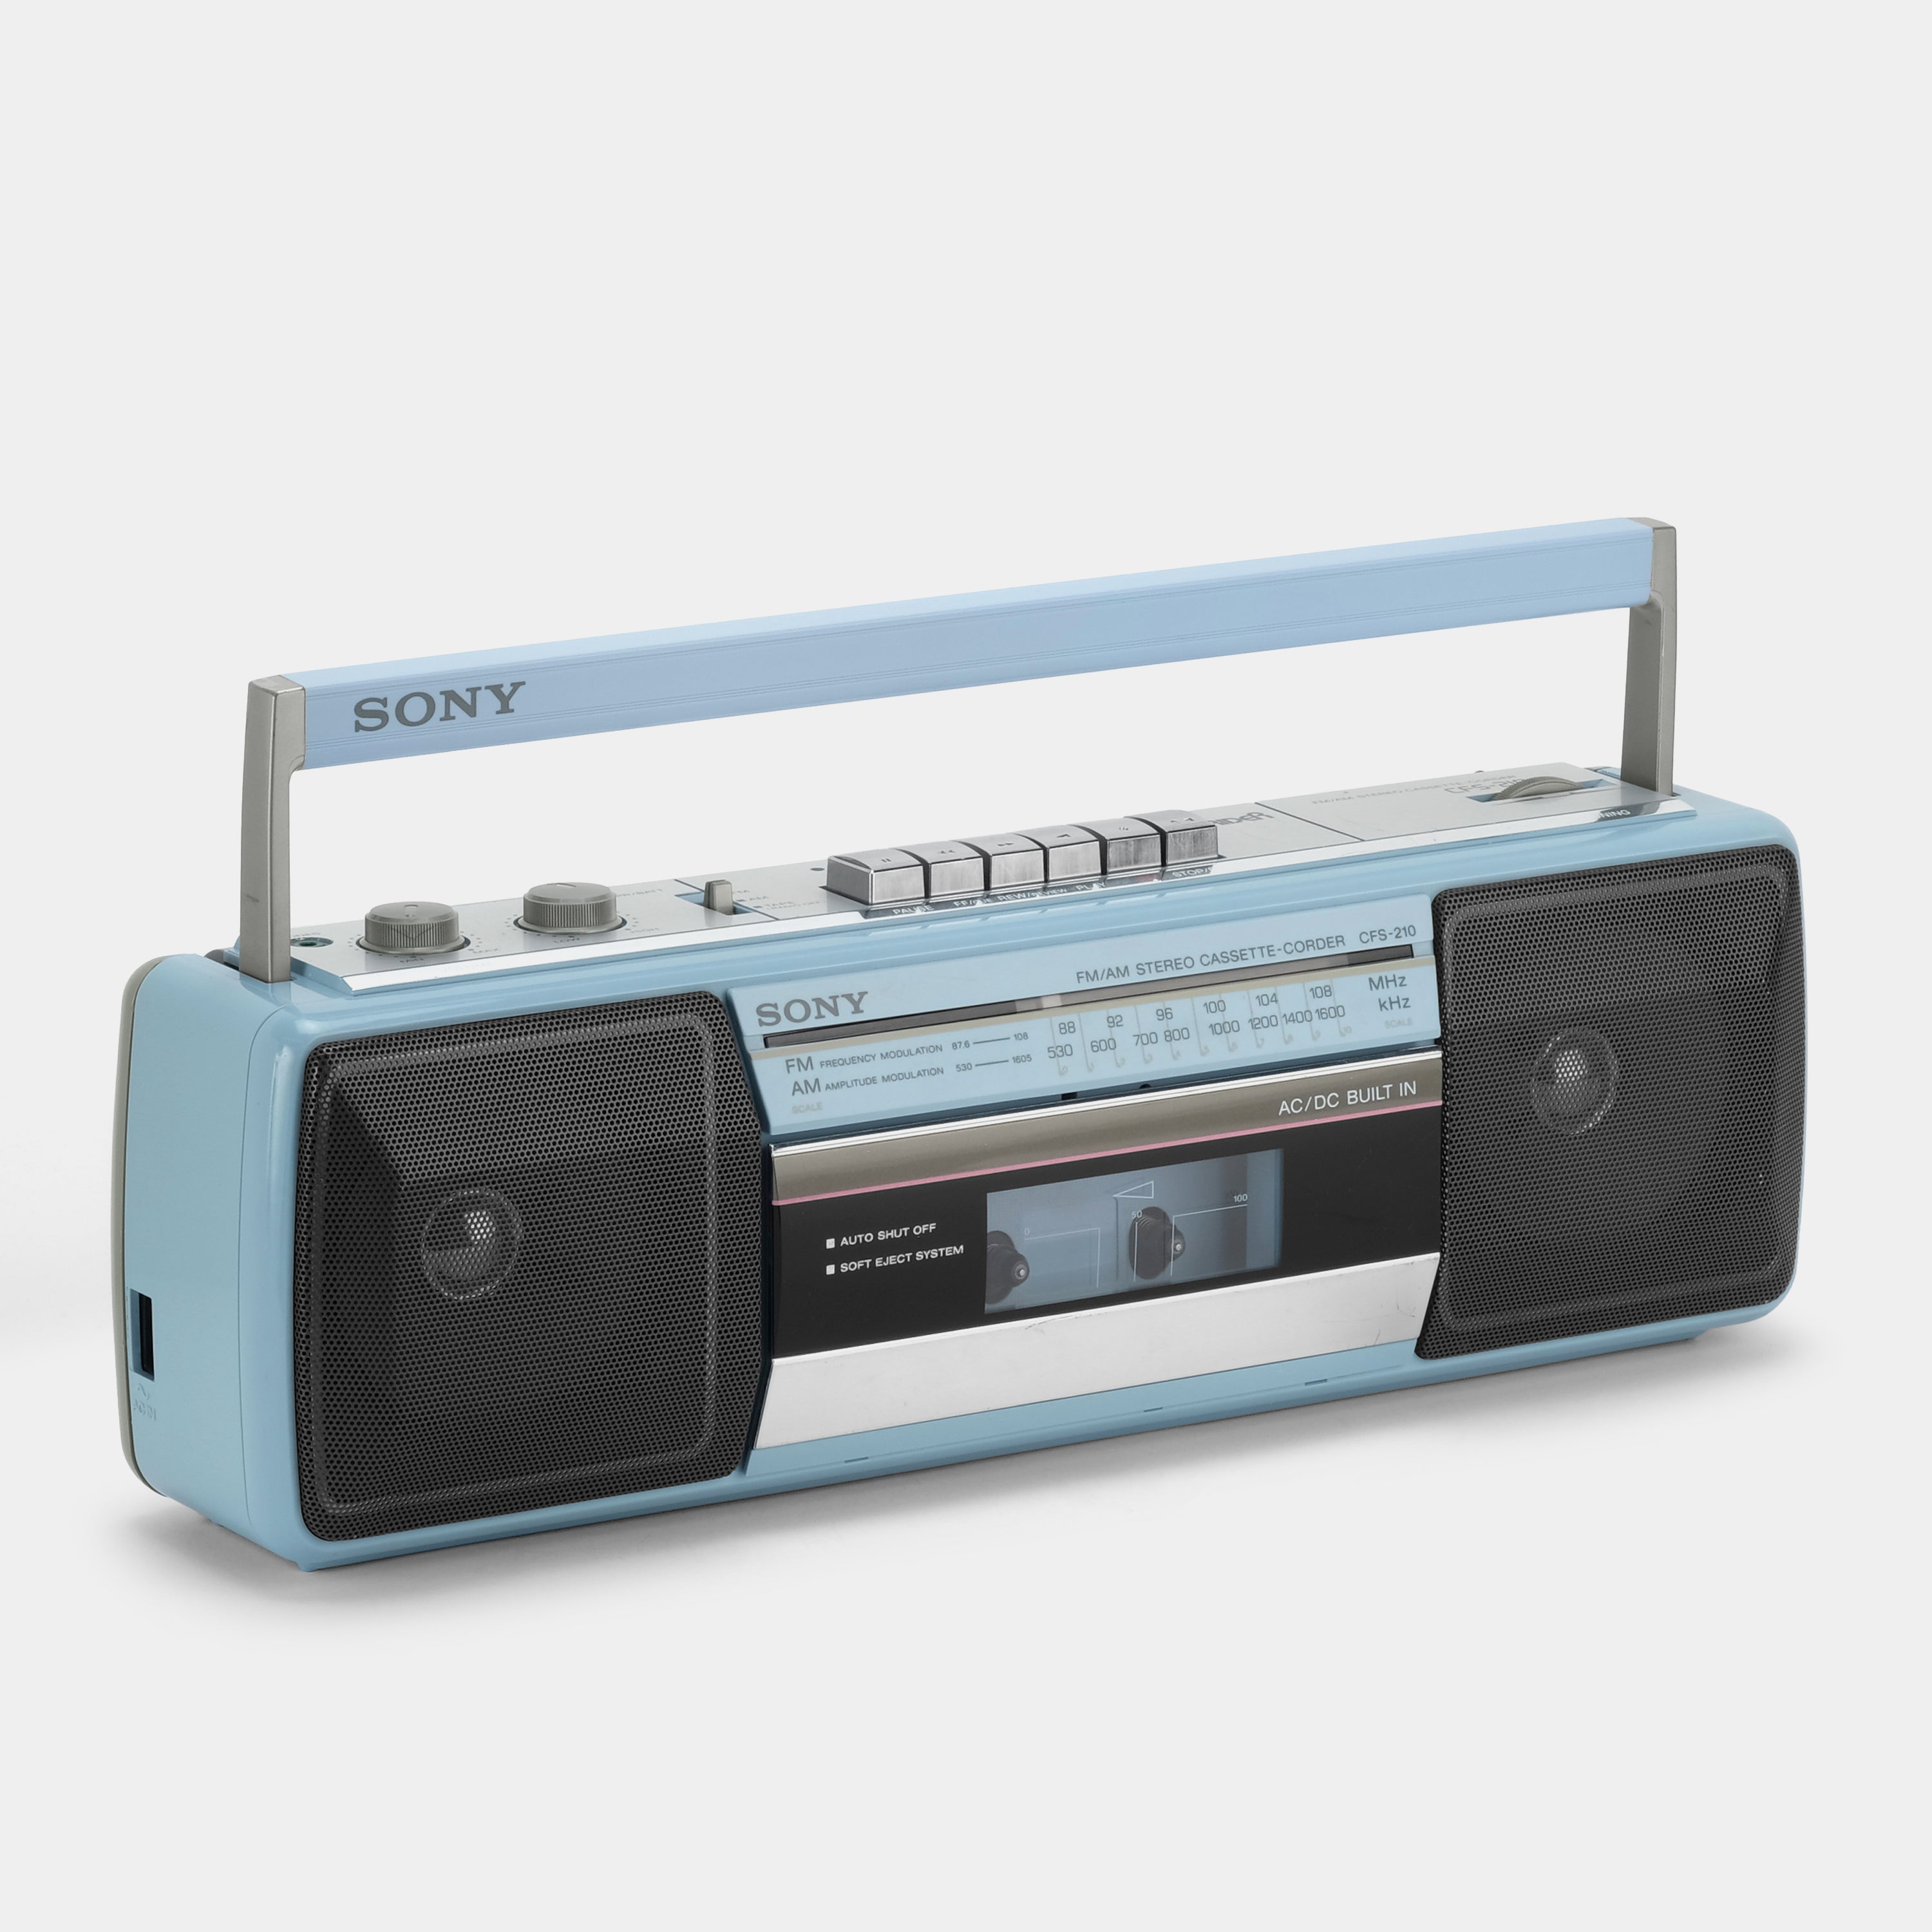 Sony Sound Rider CFS-210 FM/AM Stereo Light Blue Boombox Cassette Recorder and Player